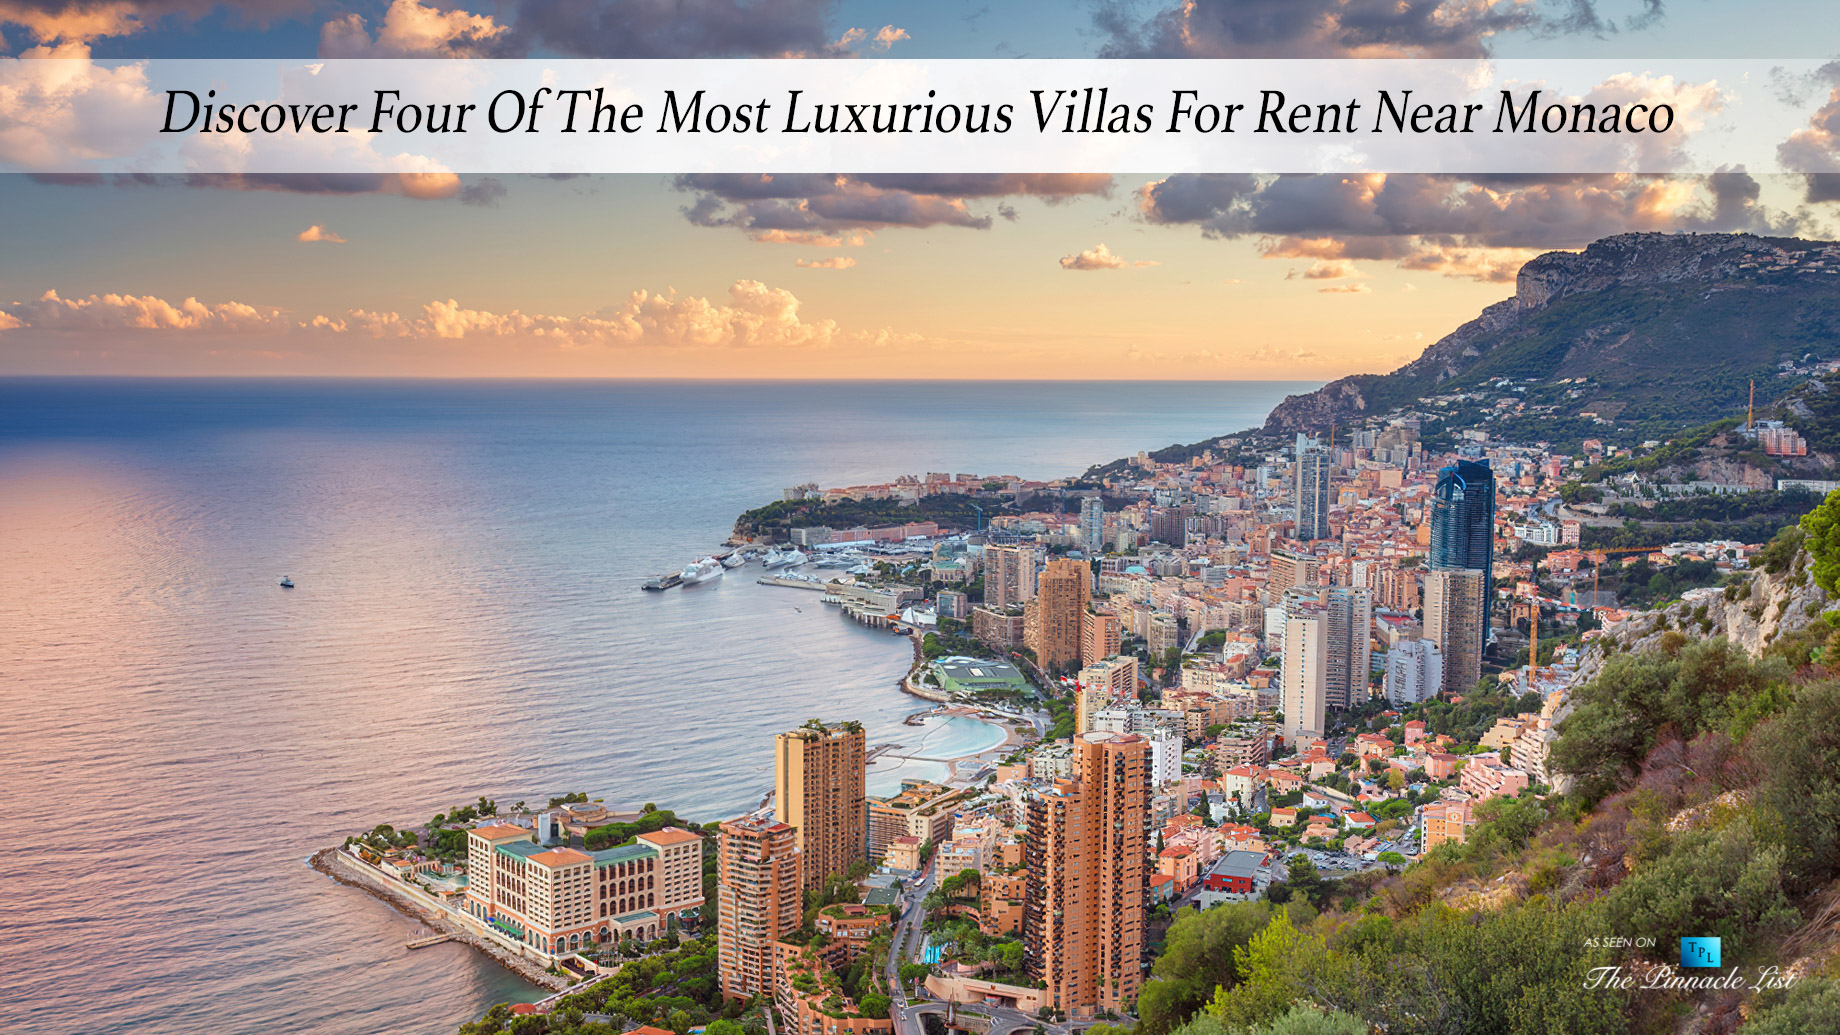 Discover Four of the Most Luxurious Villas for Rent Near Monaco 2022